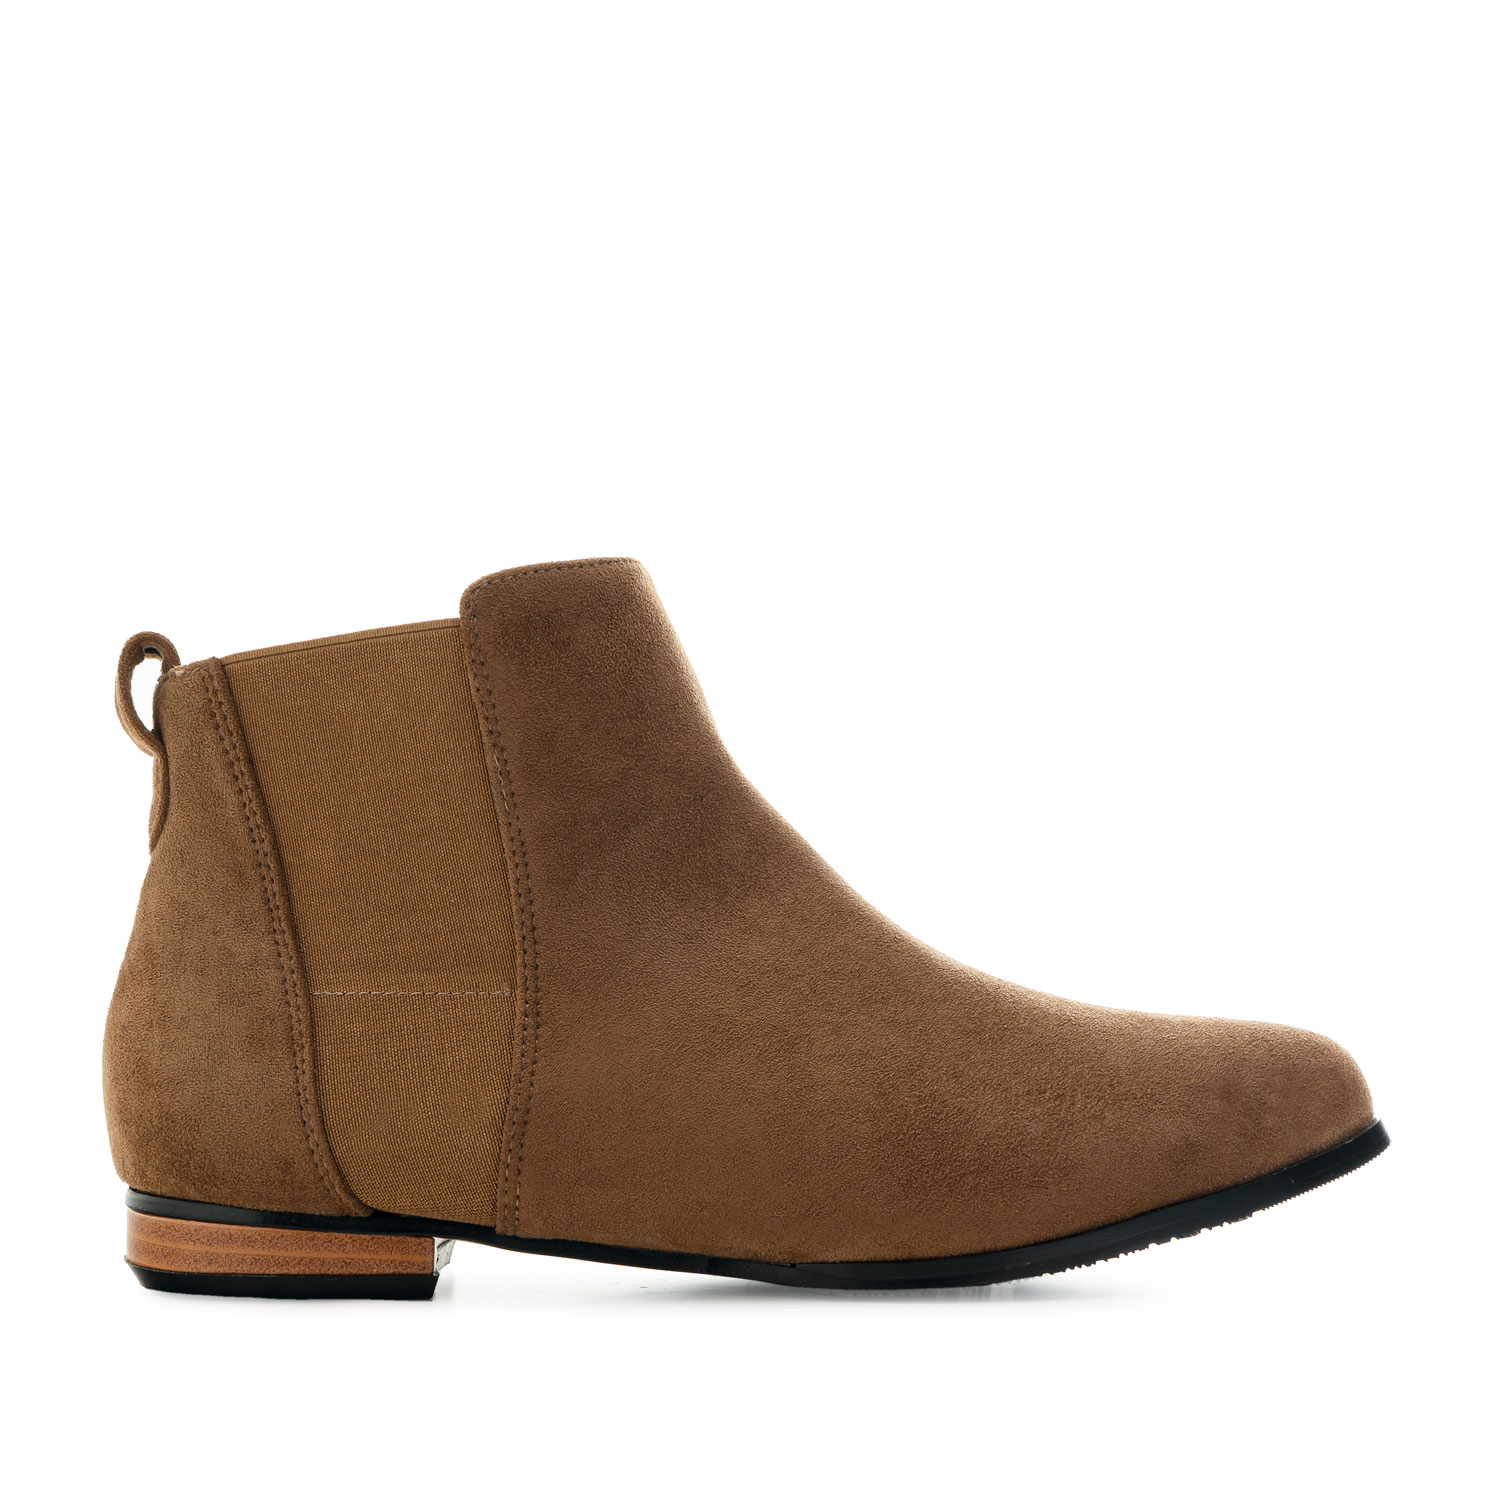 Buy > brown suede flat boots > in stock